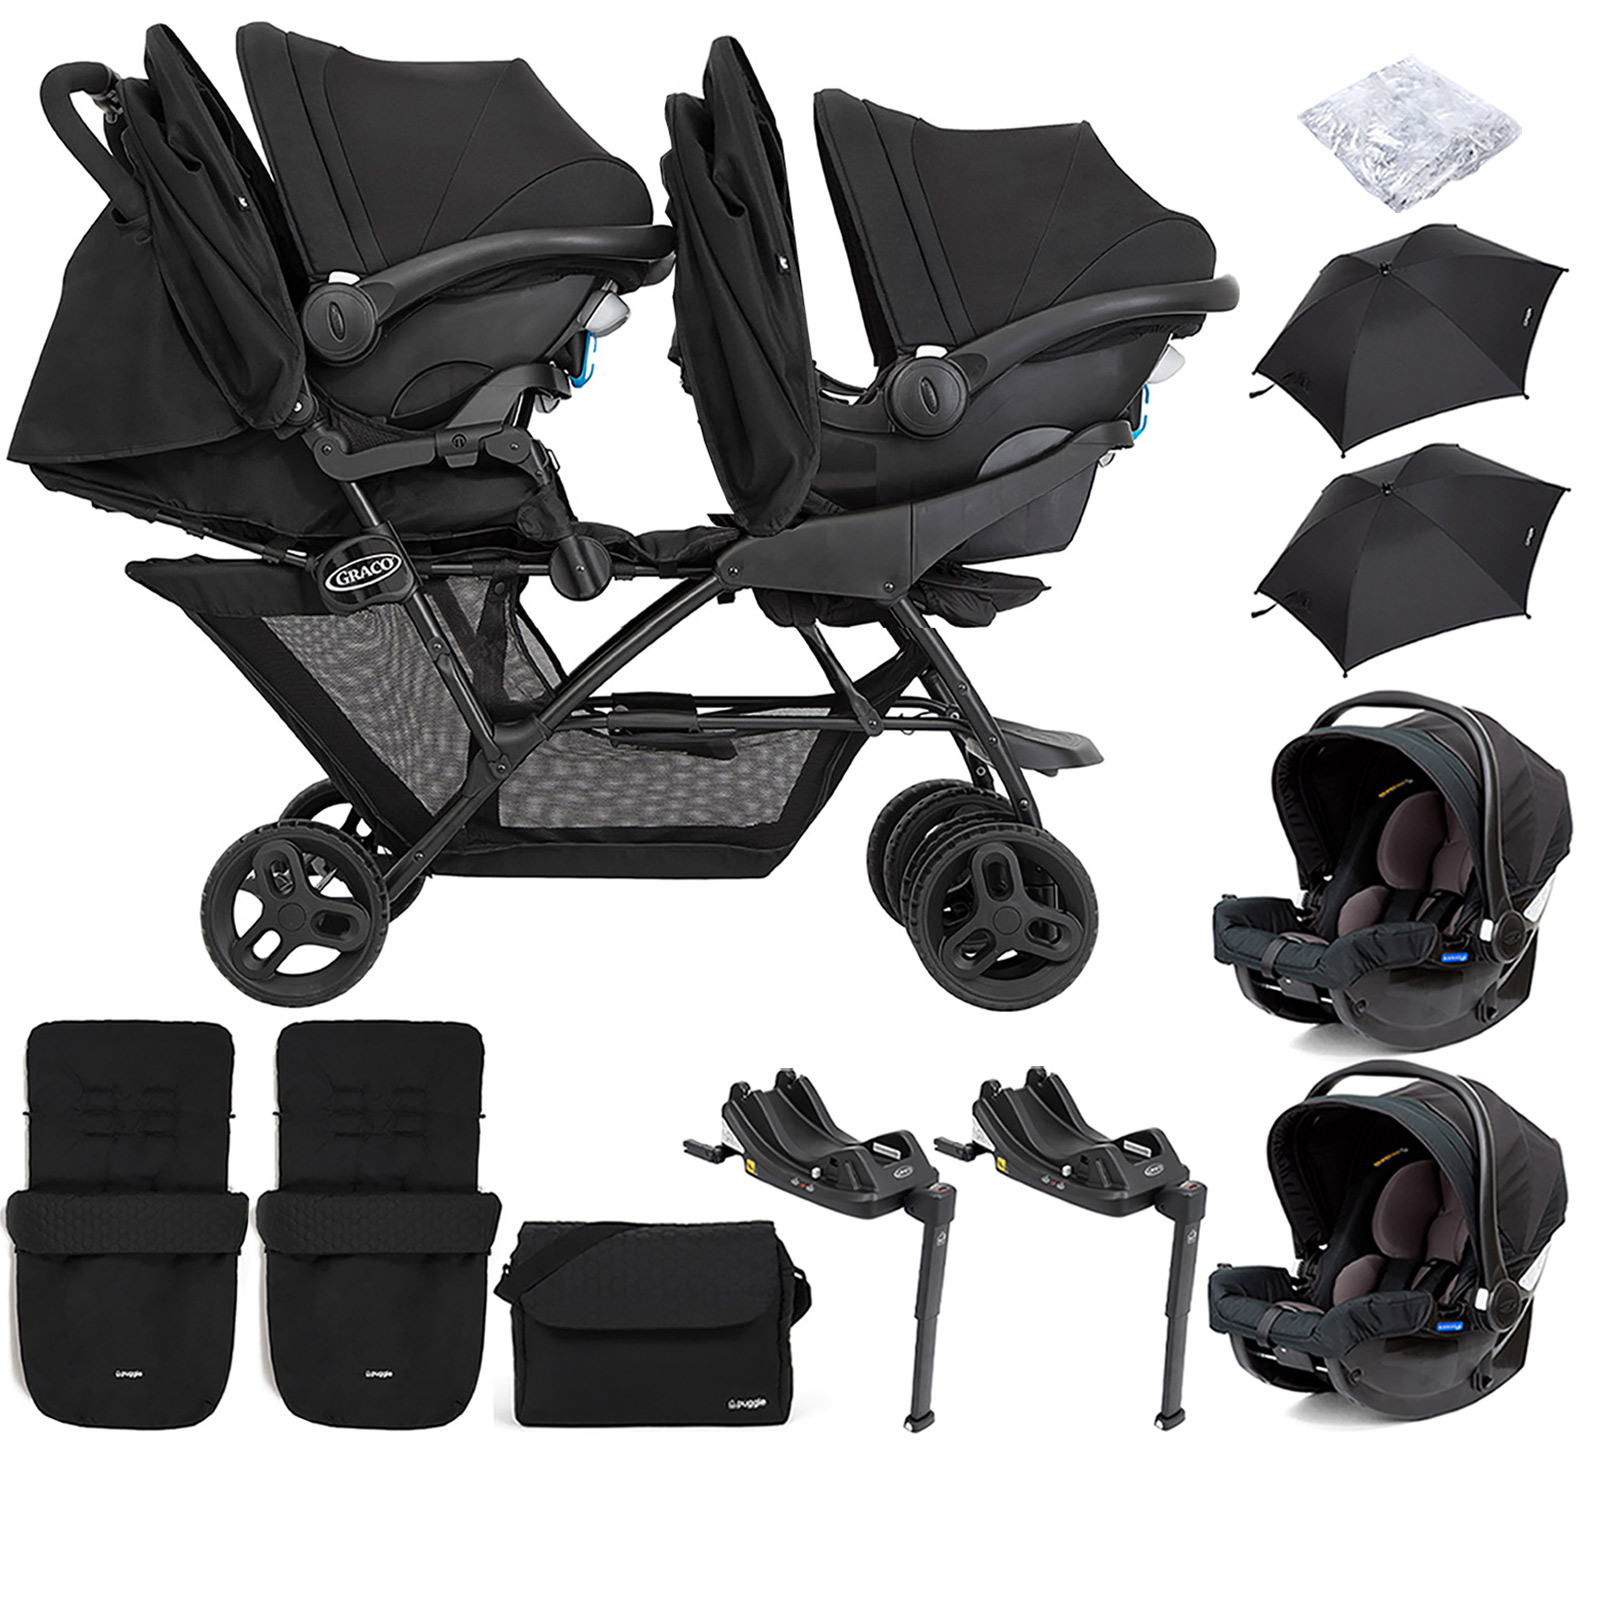 Graco Blaaze™ Stadium Duo Tandem Travel System with Front Apron, Raincover, 2 Footmuffs, Changing Bag, 2 Car Seats, 2 Bases & 2 Parasols - Night Sky